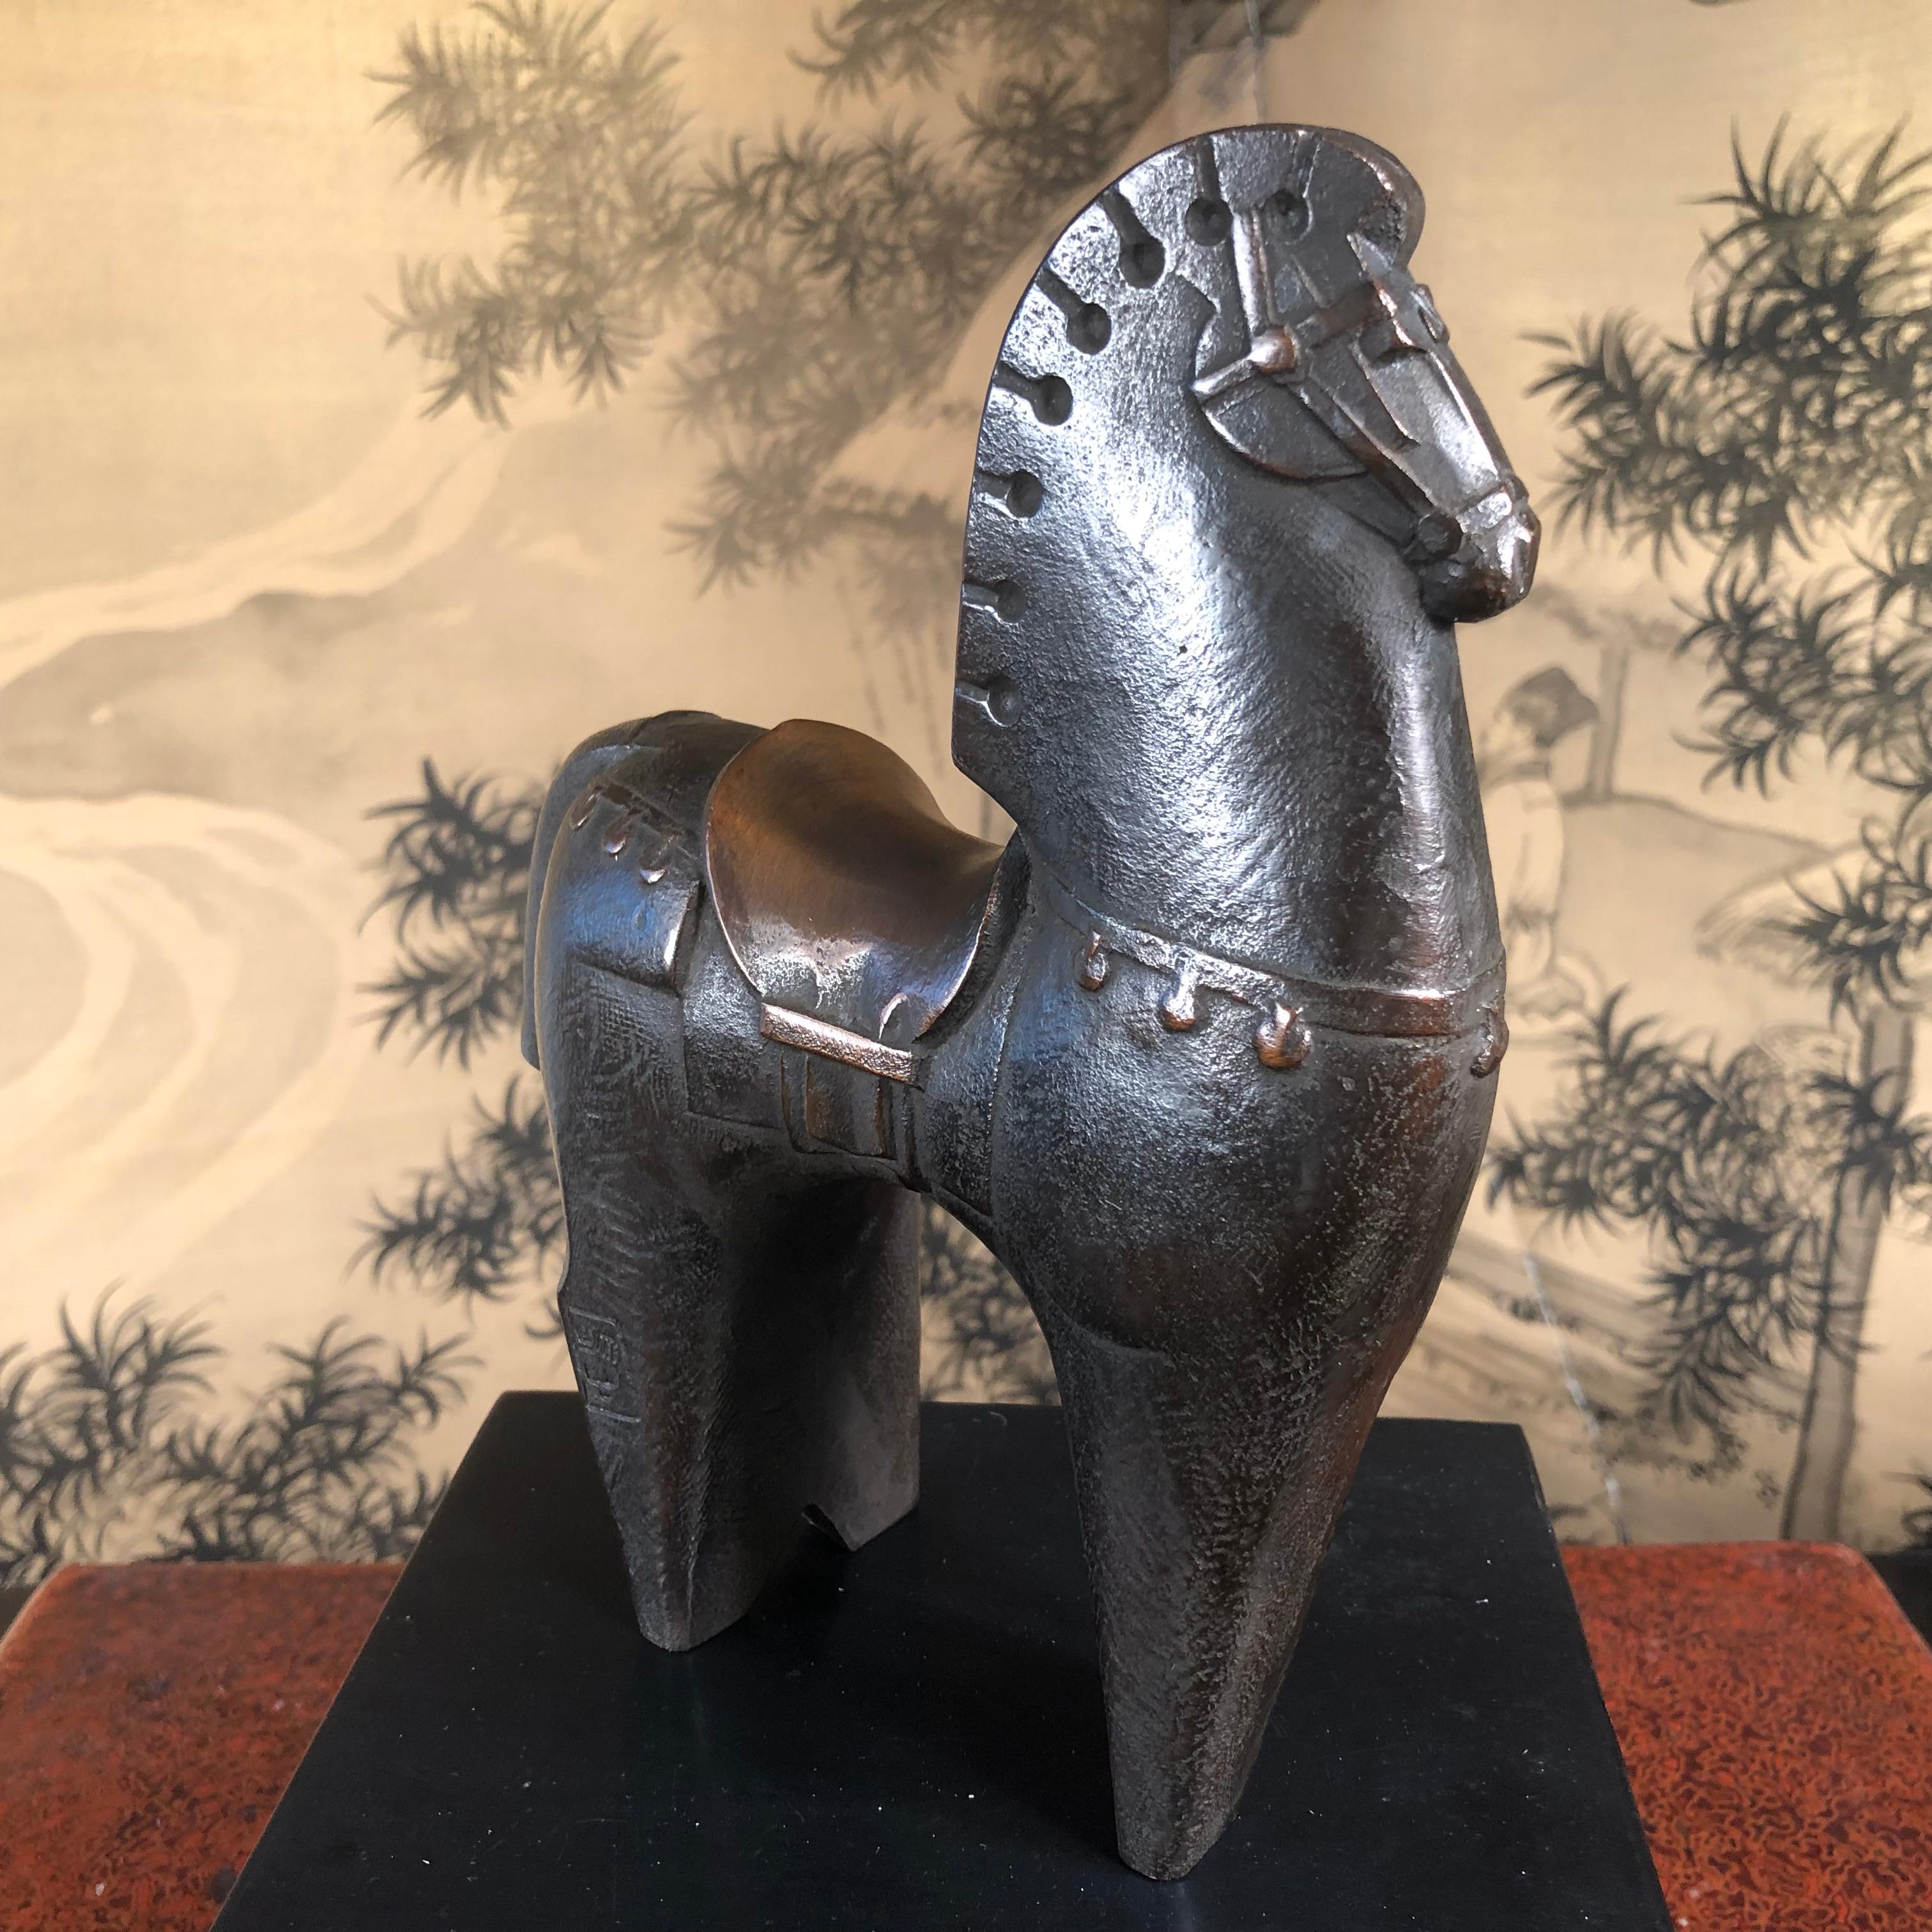 The first we have seen.

This enigmatic ancient-style Japanese horse- a master work caste in solid bronze reminds us of the ancient original clay horses such as Haniwa model horse from the Kofun period (593-710 AD).

Designed by the Japanese legend